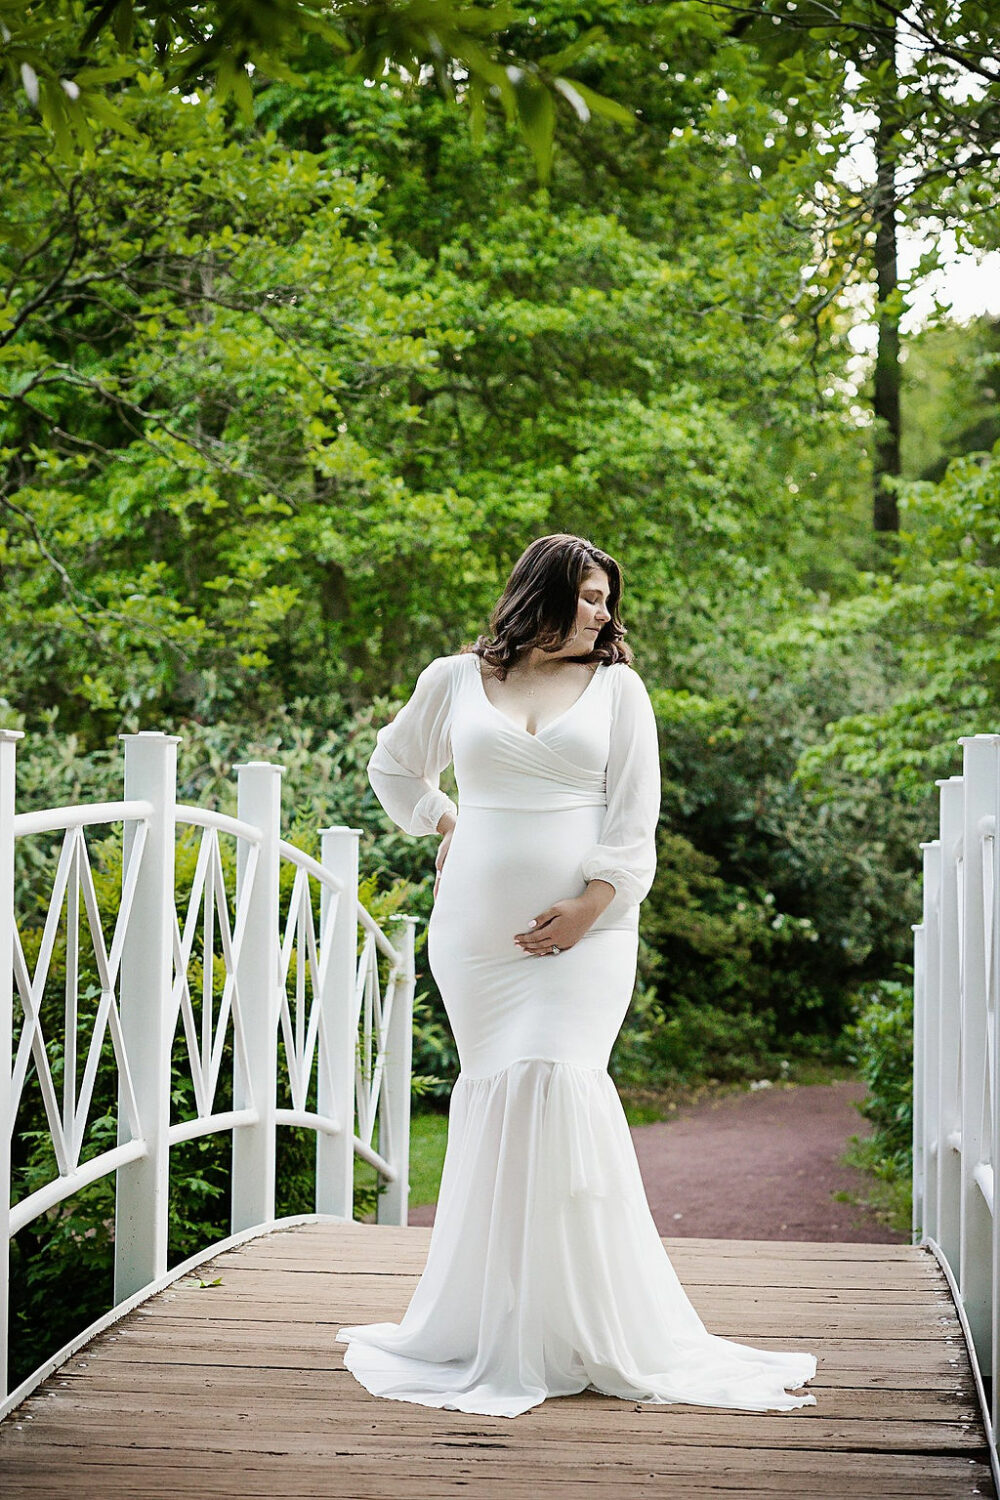 Pregnant women wearing tight maternity dress for her spring garden maternity session in Wrightstown, NJ.